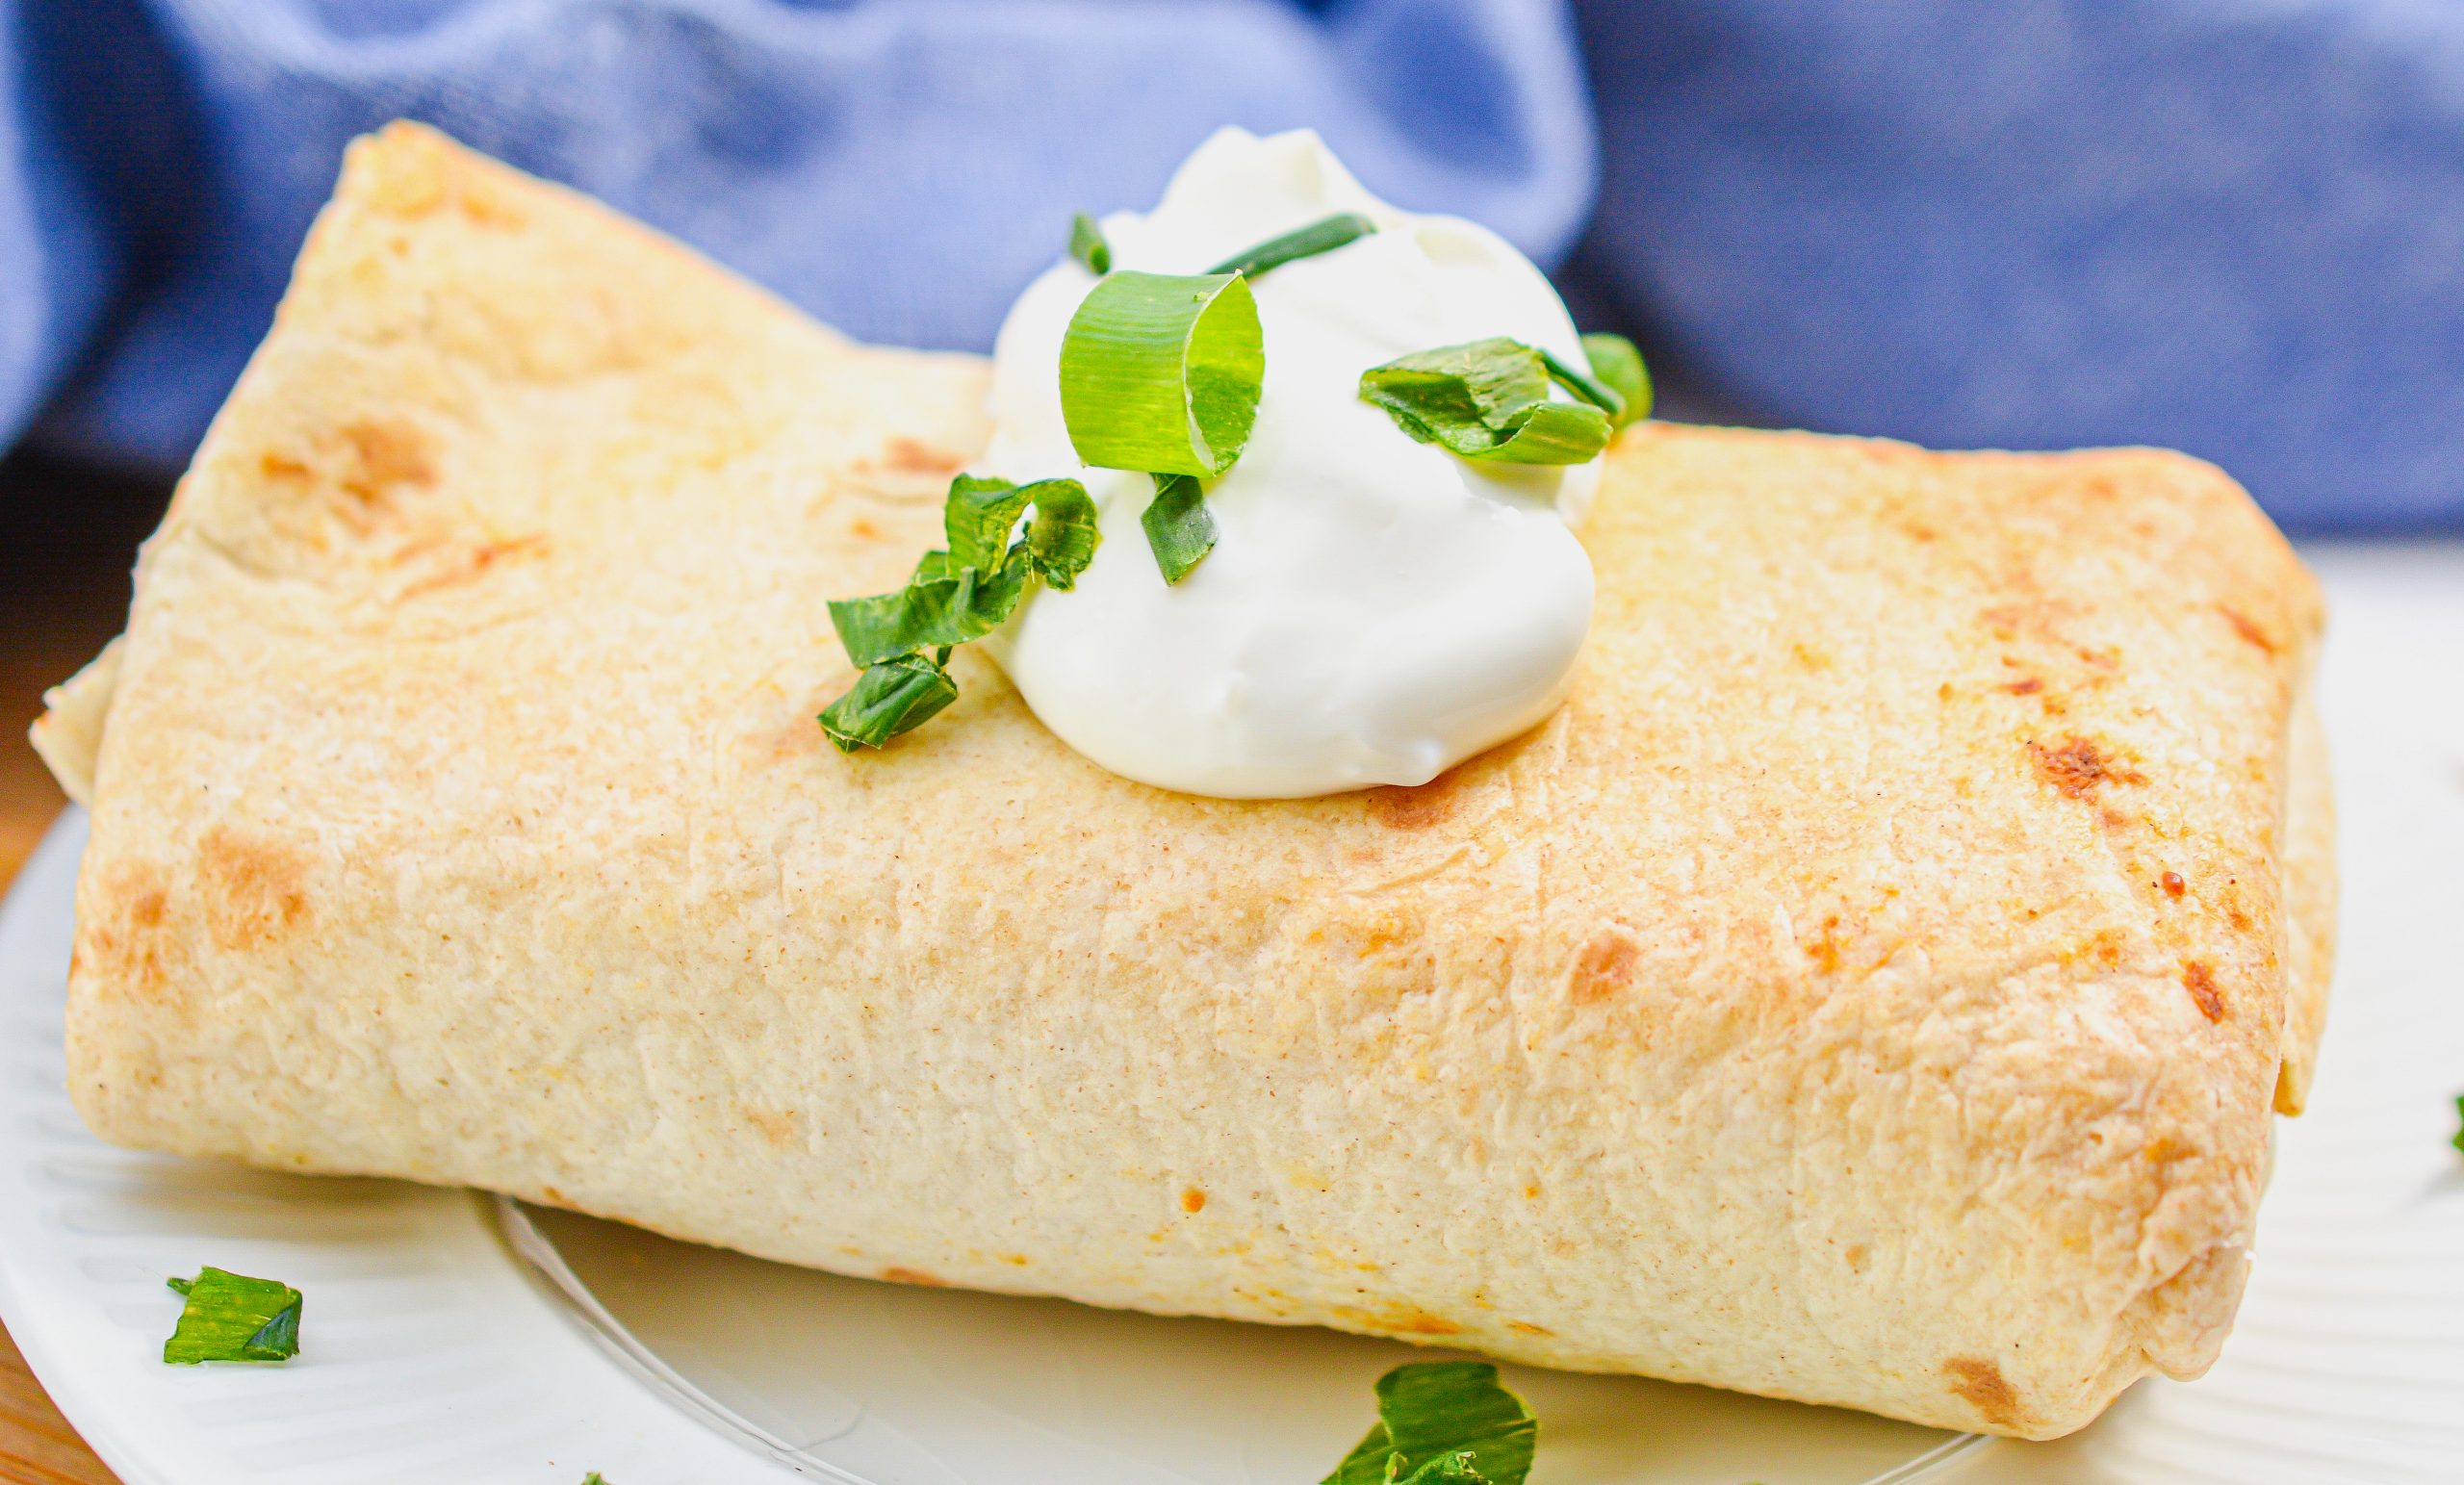 The BEST Baked chimichangas - in just 6 simple steps